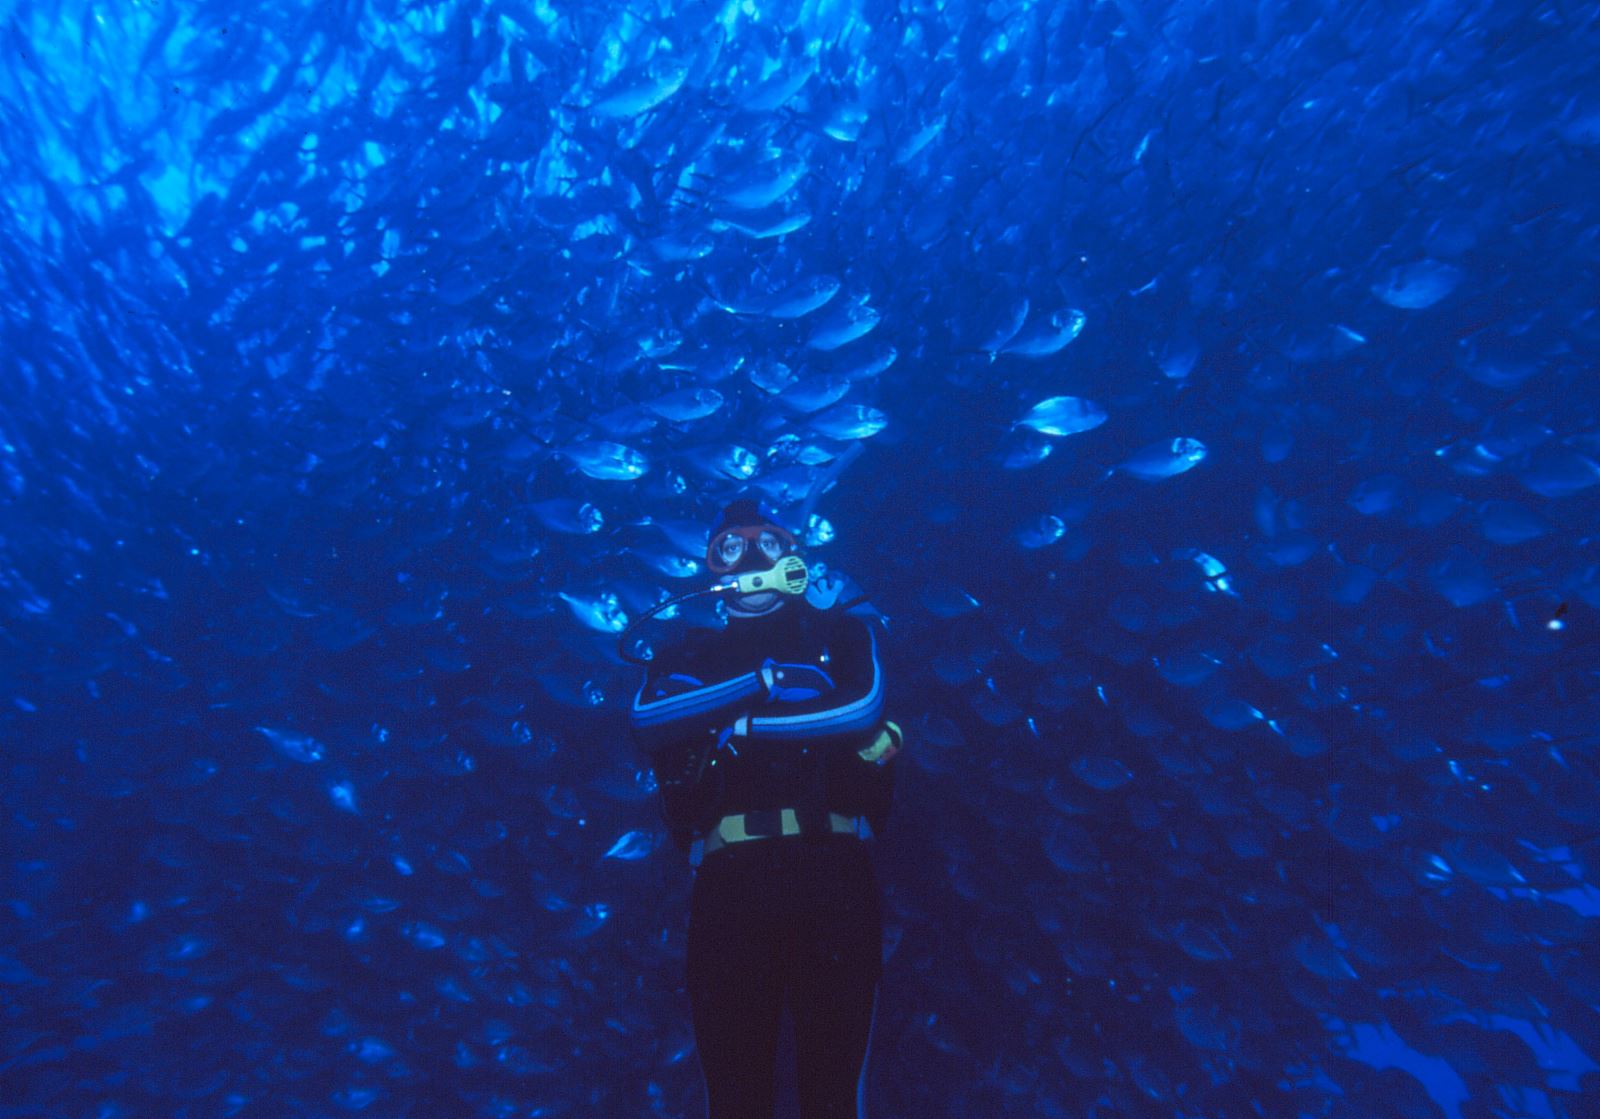 Rick Moore surrounded by a school of fish while scuba-diving